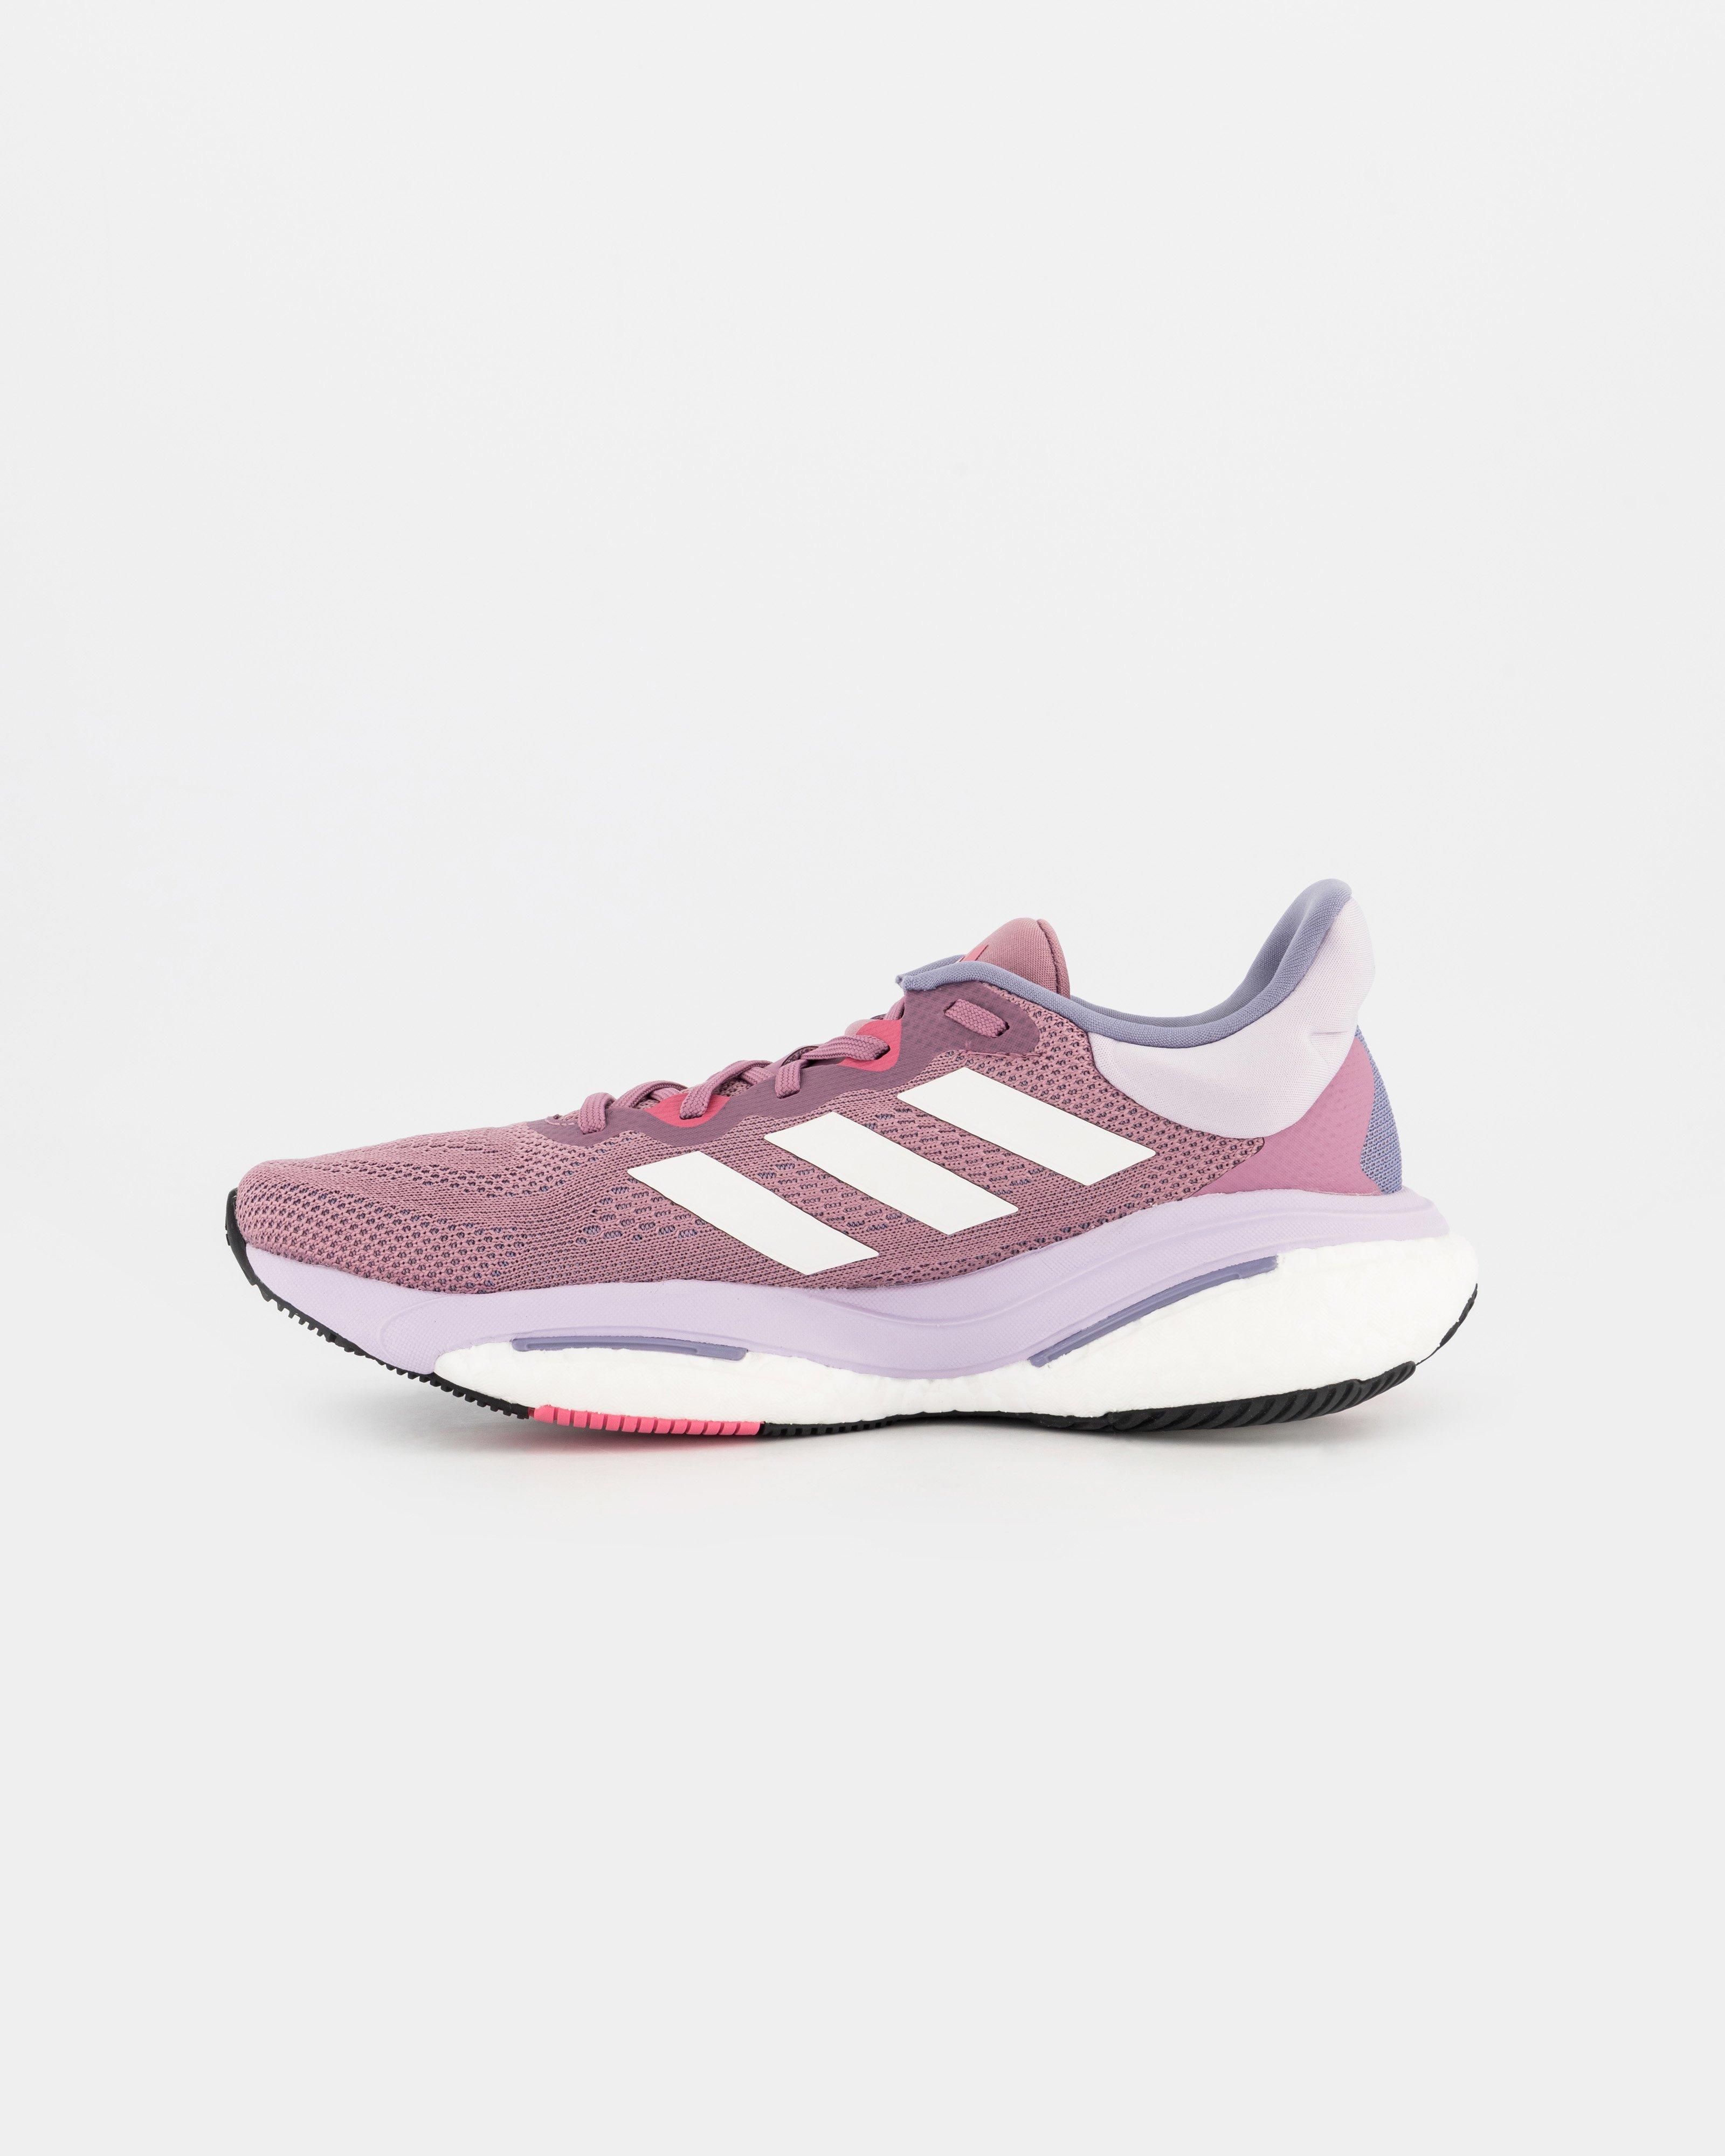 Adidas Women’s SOLARGLIDE 6 Road Running Shoes -  Pink